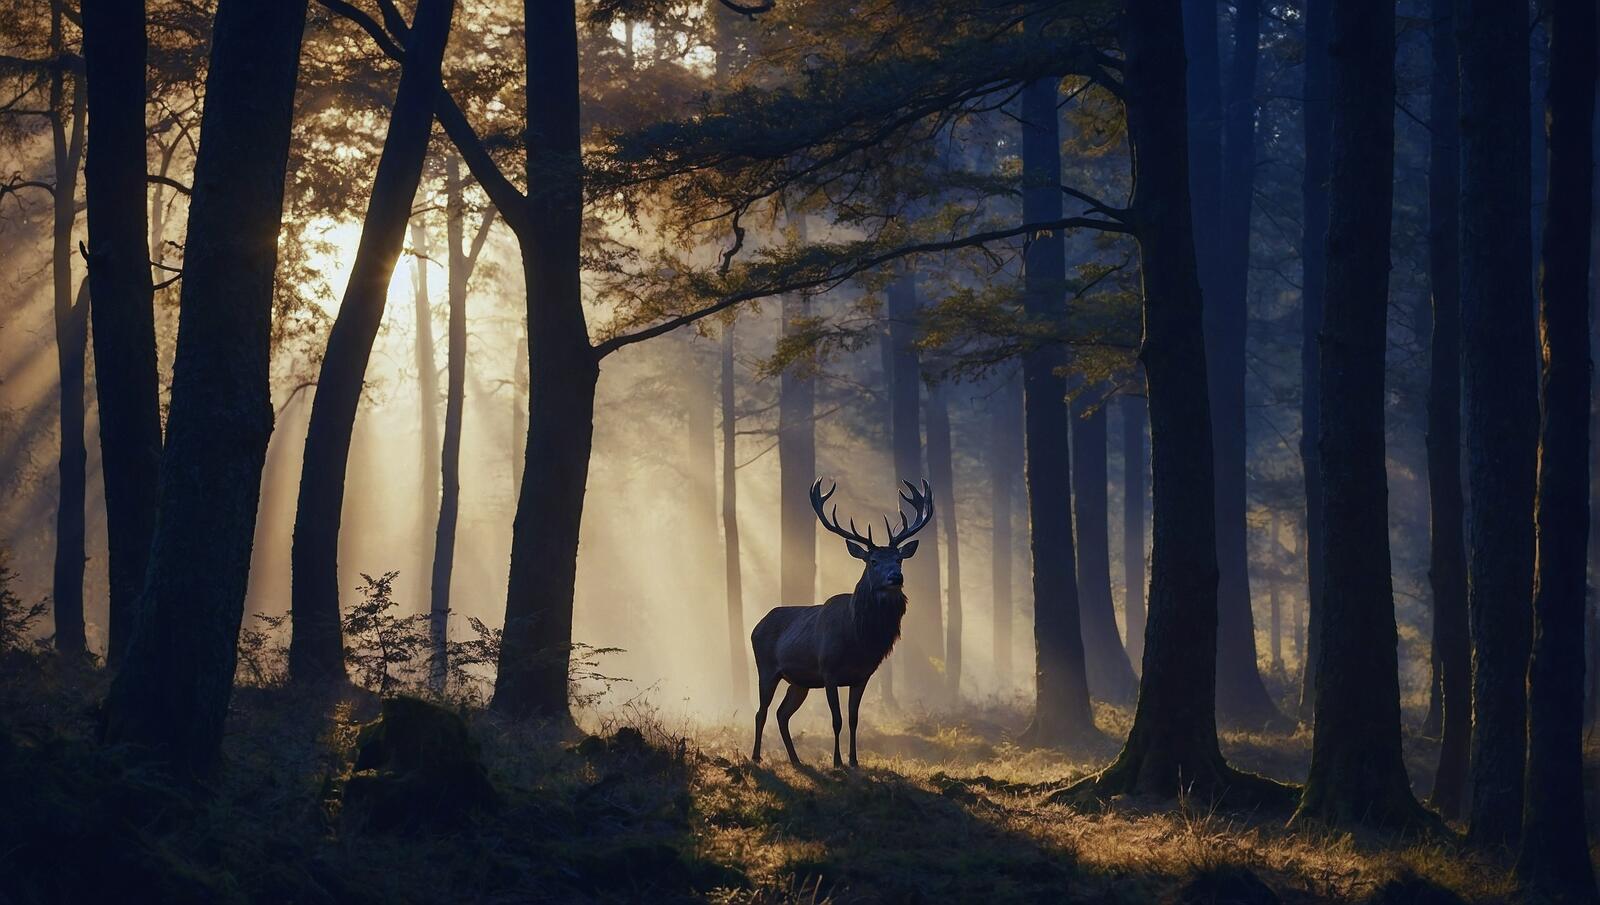 Free photo Deer standing in an early morning forest at sun rise